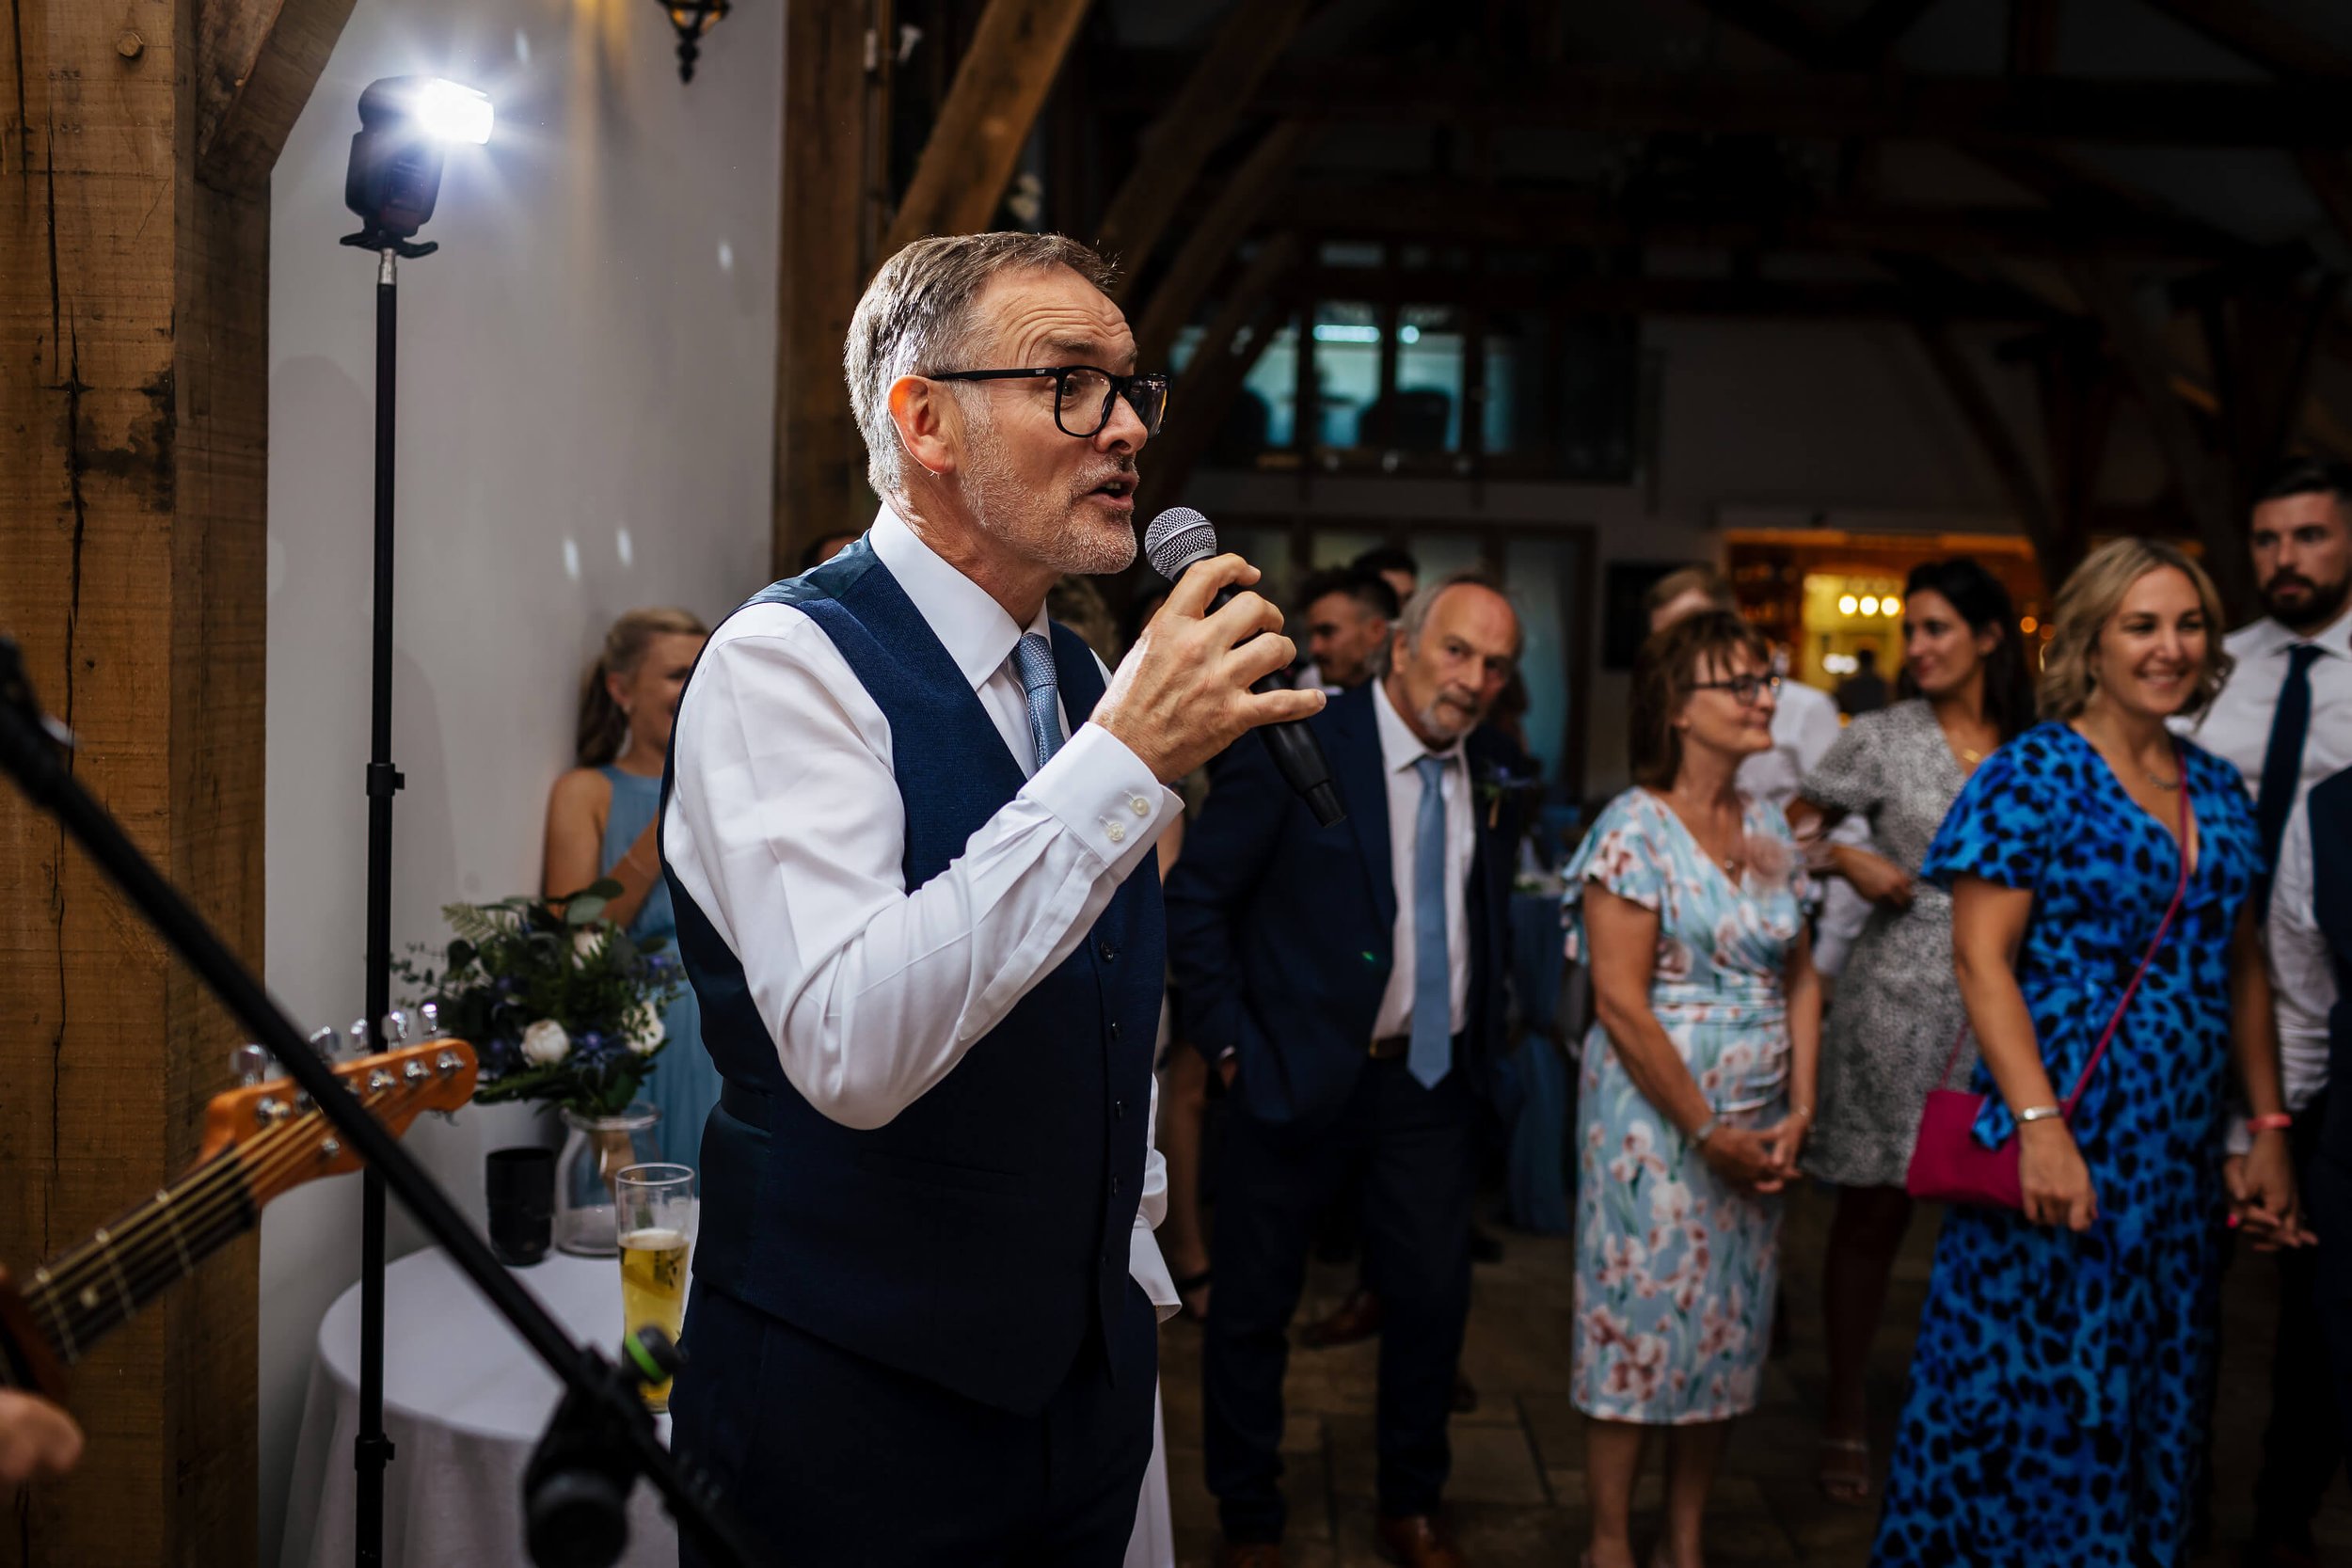 Father of the bride singing to his daughter at her wedding